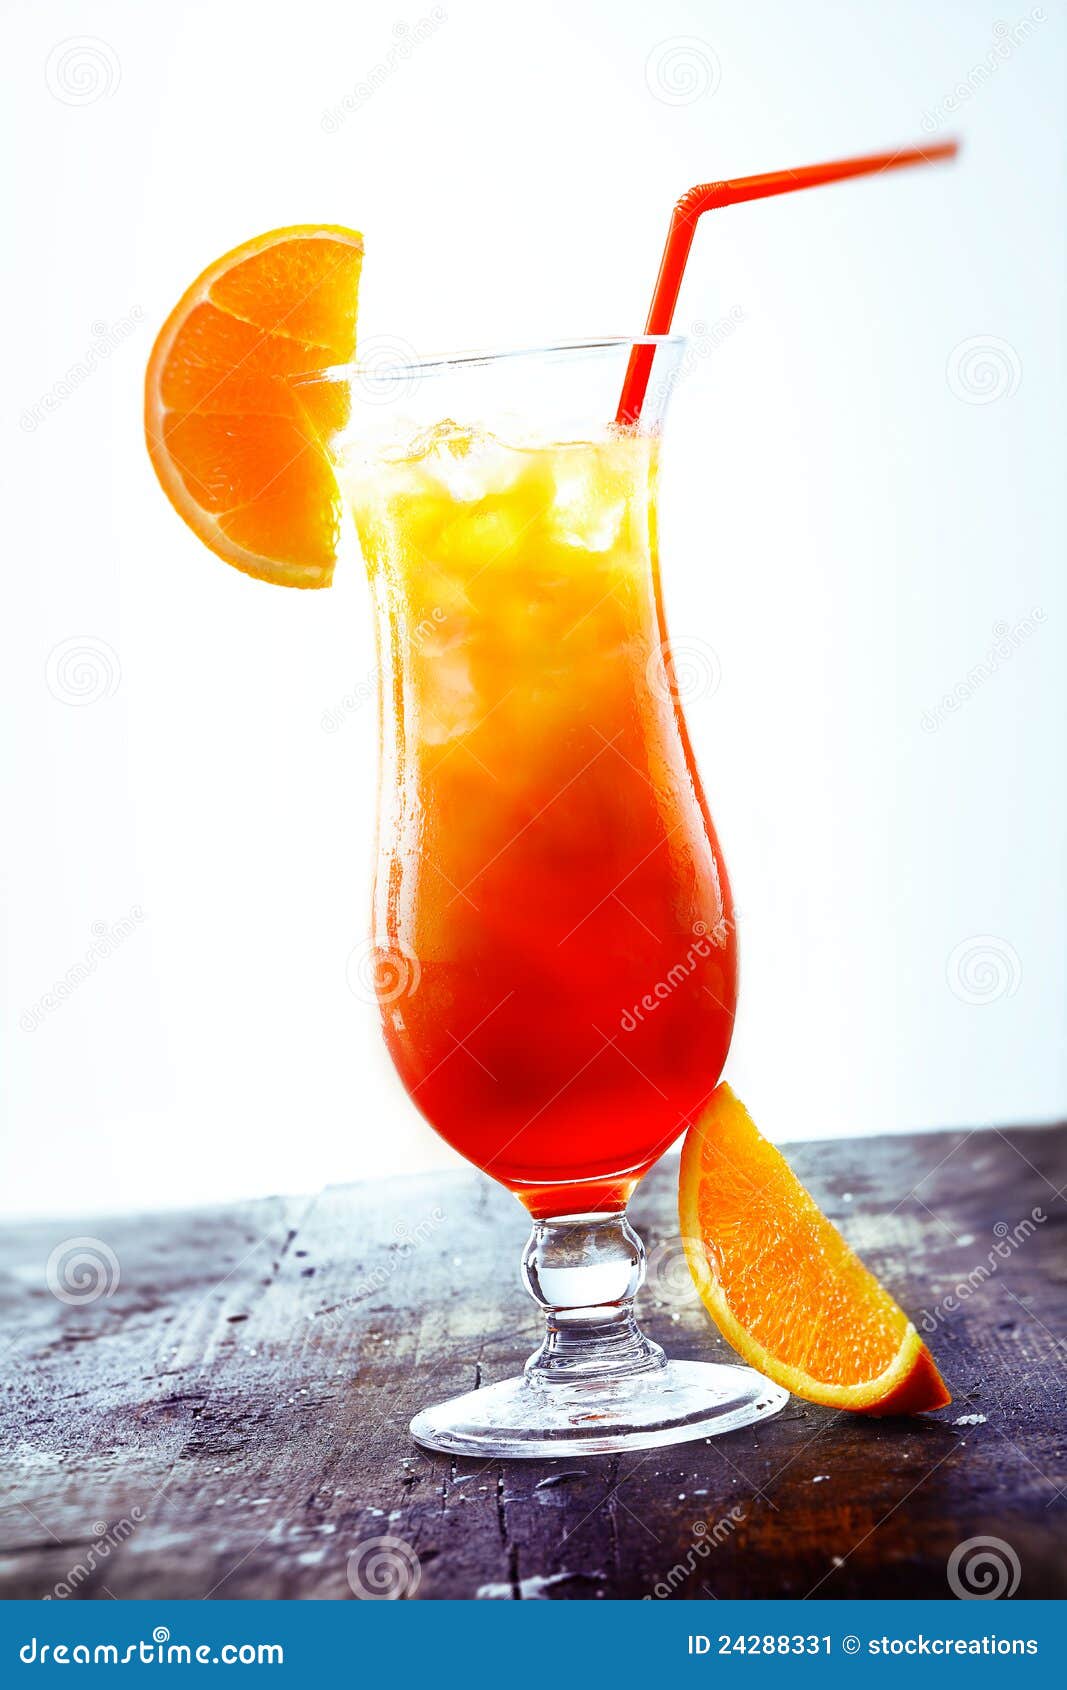 Sex On The Beach Cocktail Stock Image - Image: 24288331